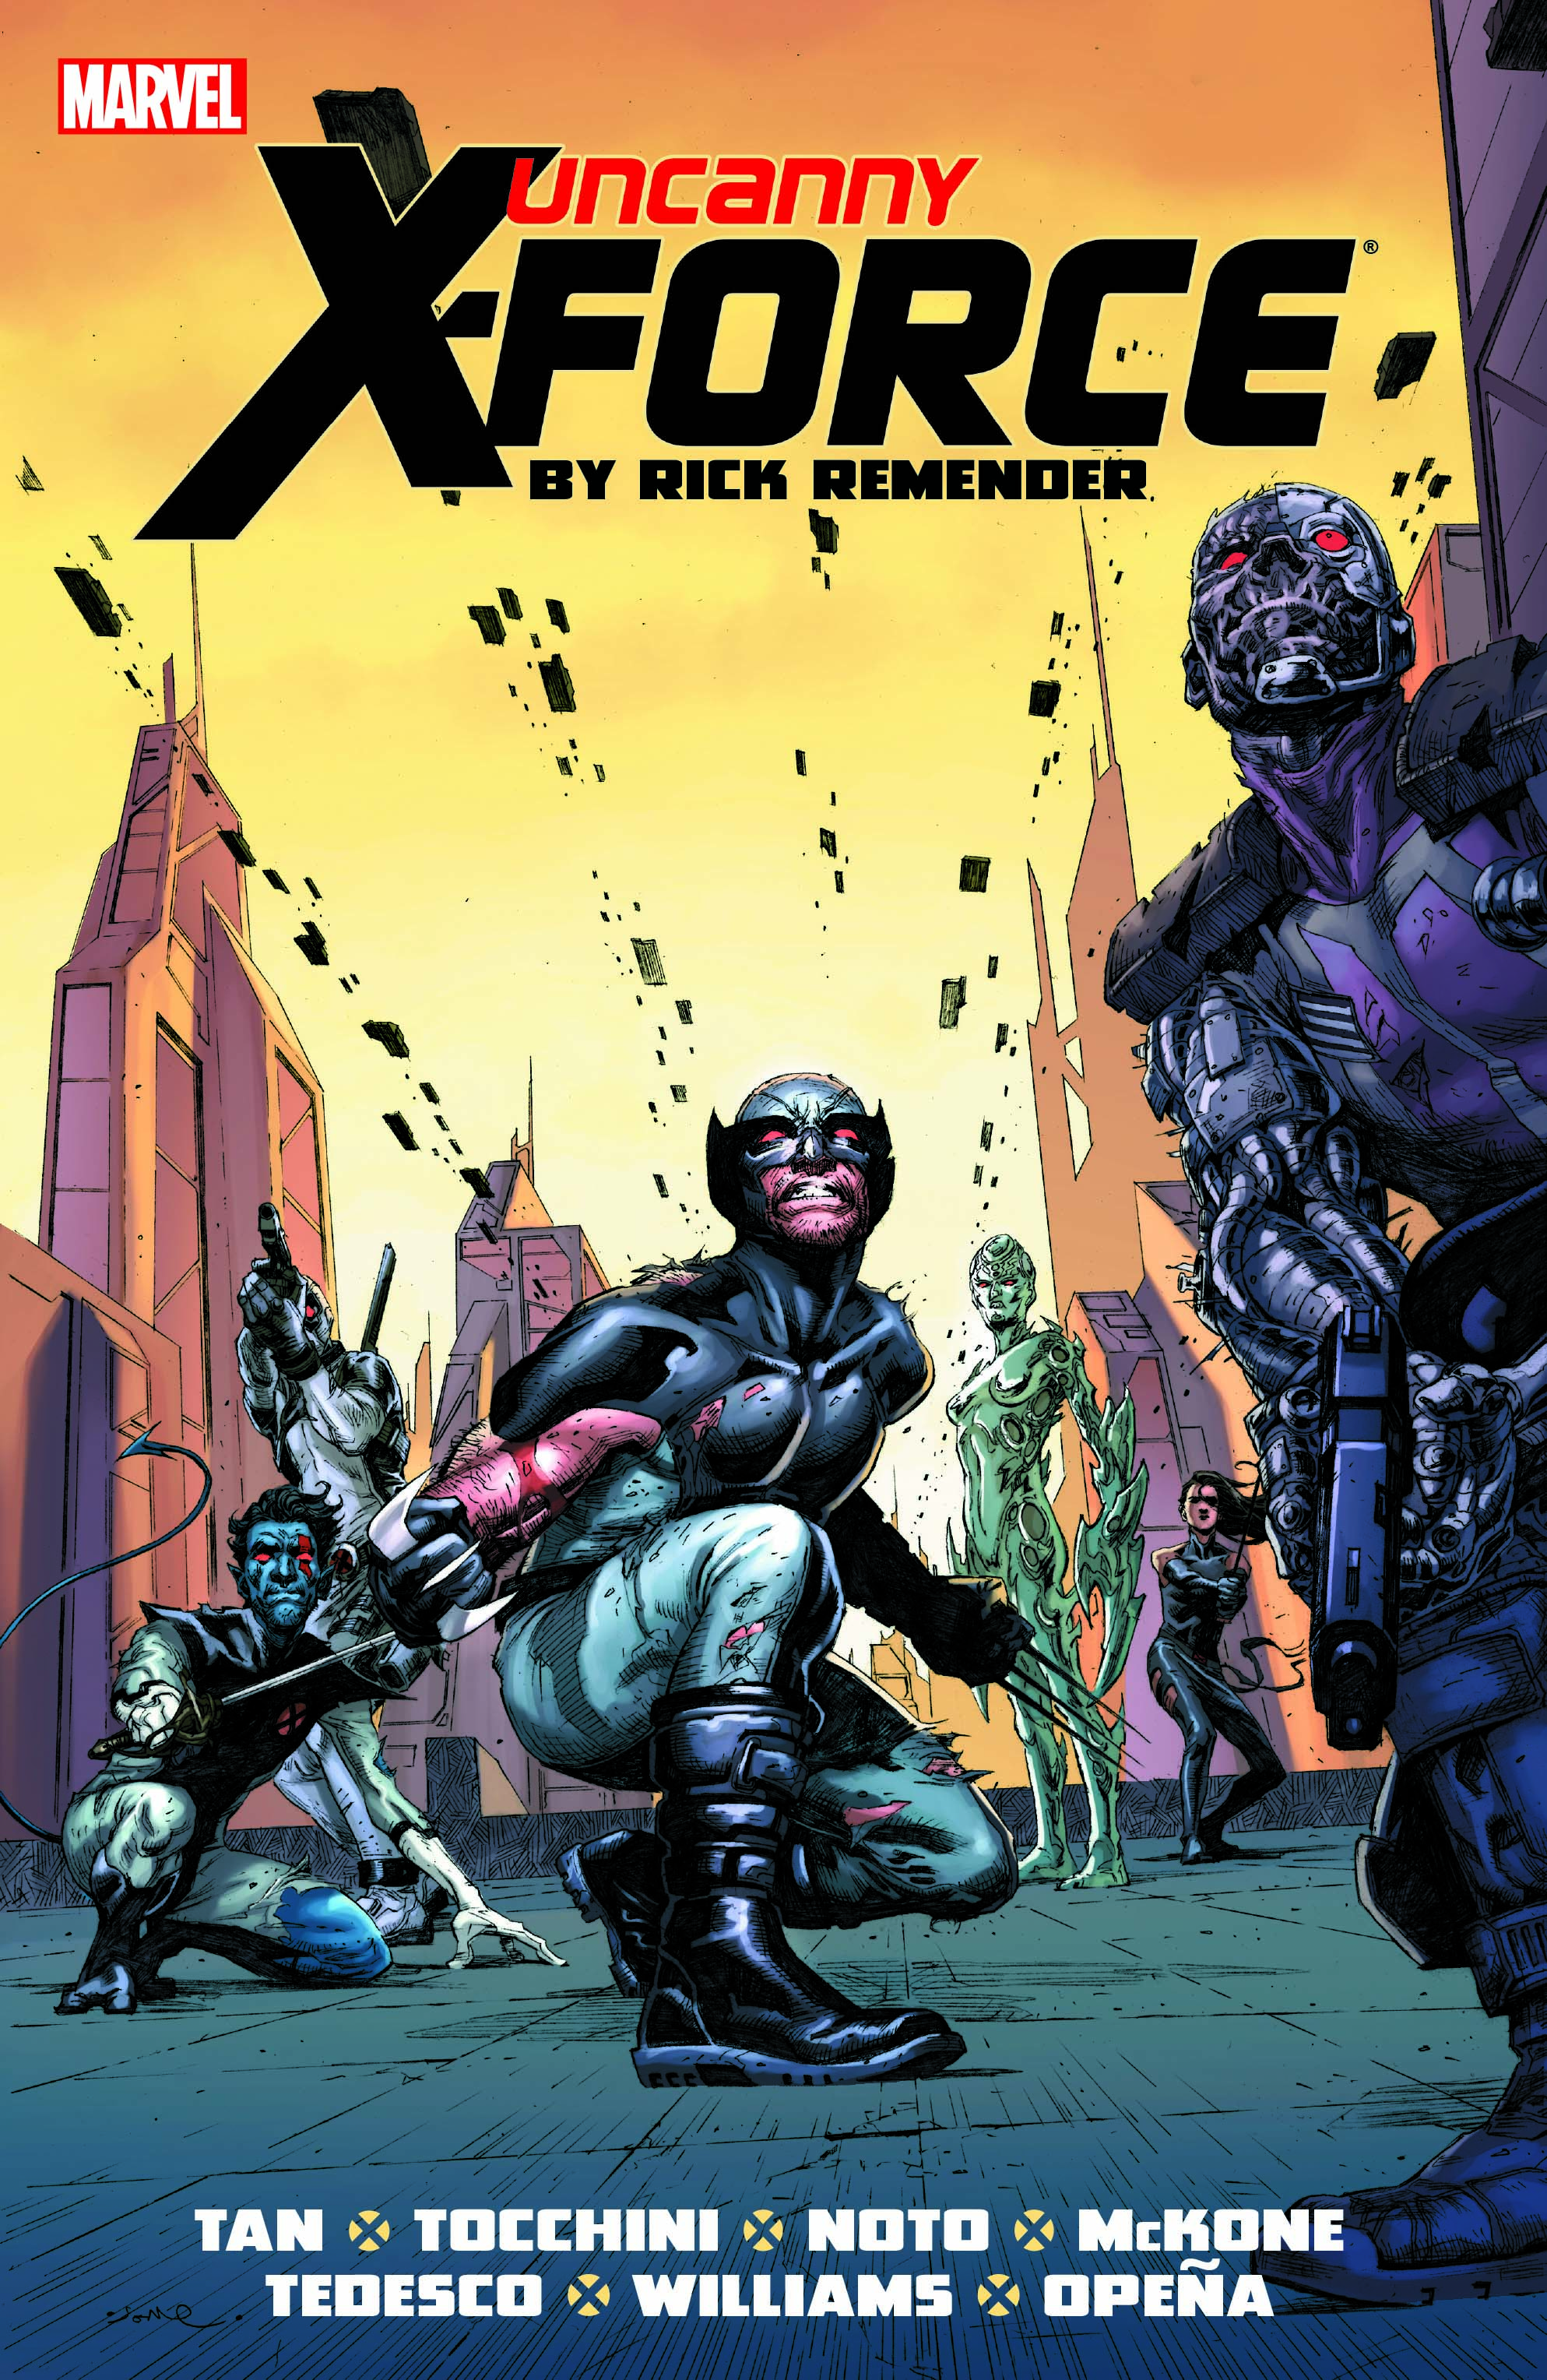 UNCANNY X-FORCE BY RICK REMENDER: THE COMPLETE COLLECTION VOL. 2 TPB (Trade Paperback)